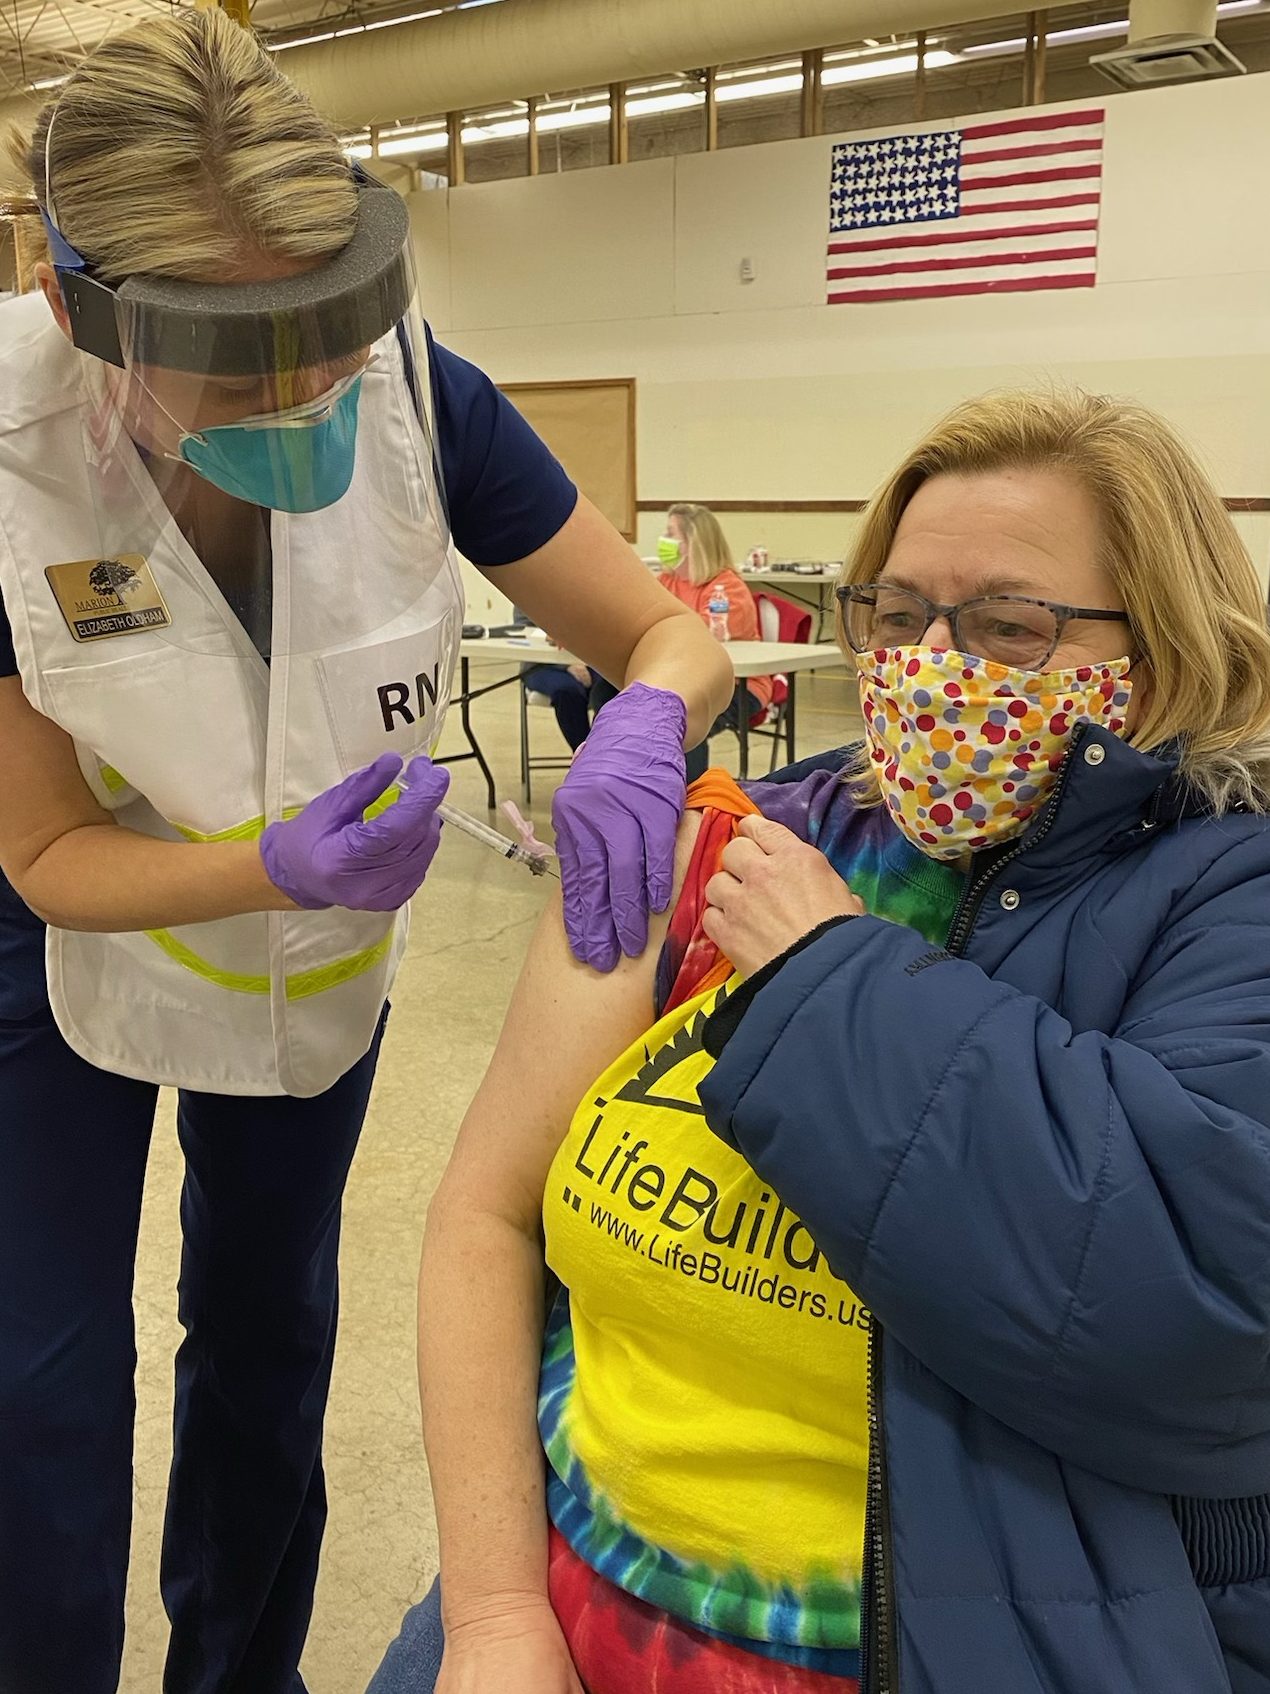 Janet Grossman is a direct support professional (DSP) for Life Builders, an Adult Day Service (ADS) provider. She is pictured here receiving her second COVID vaccination at the MCBDD.